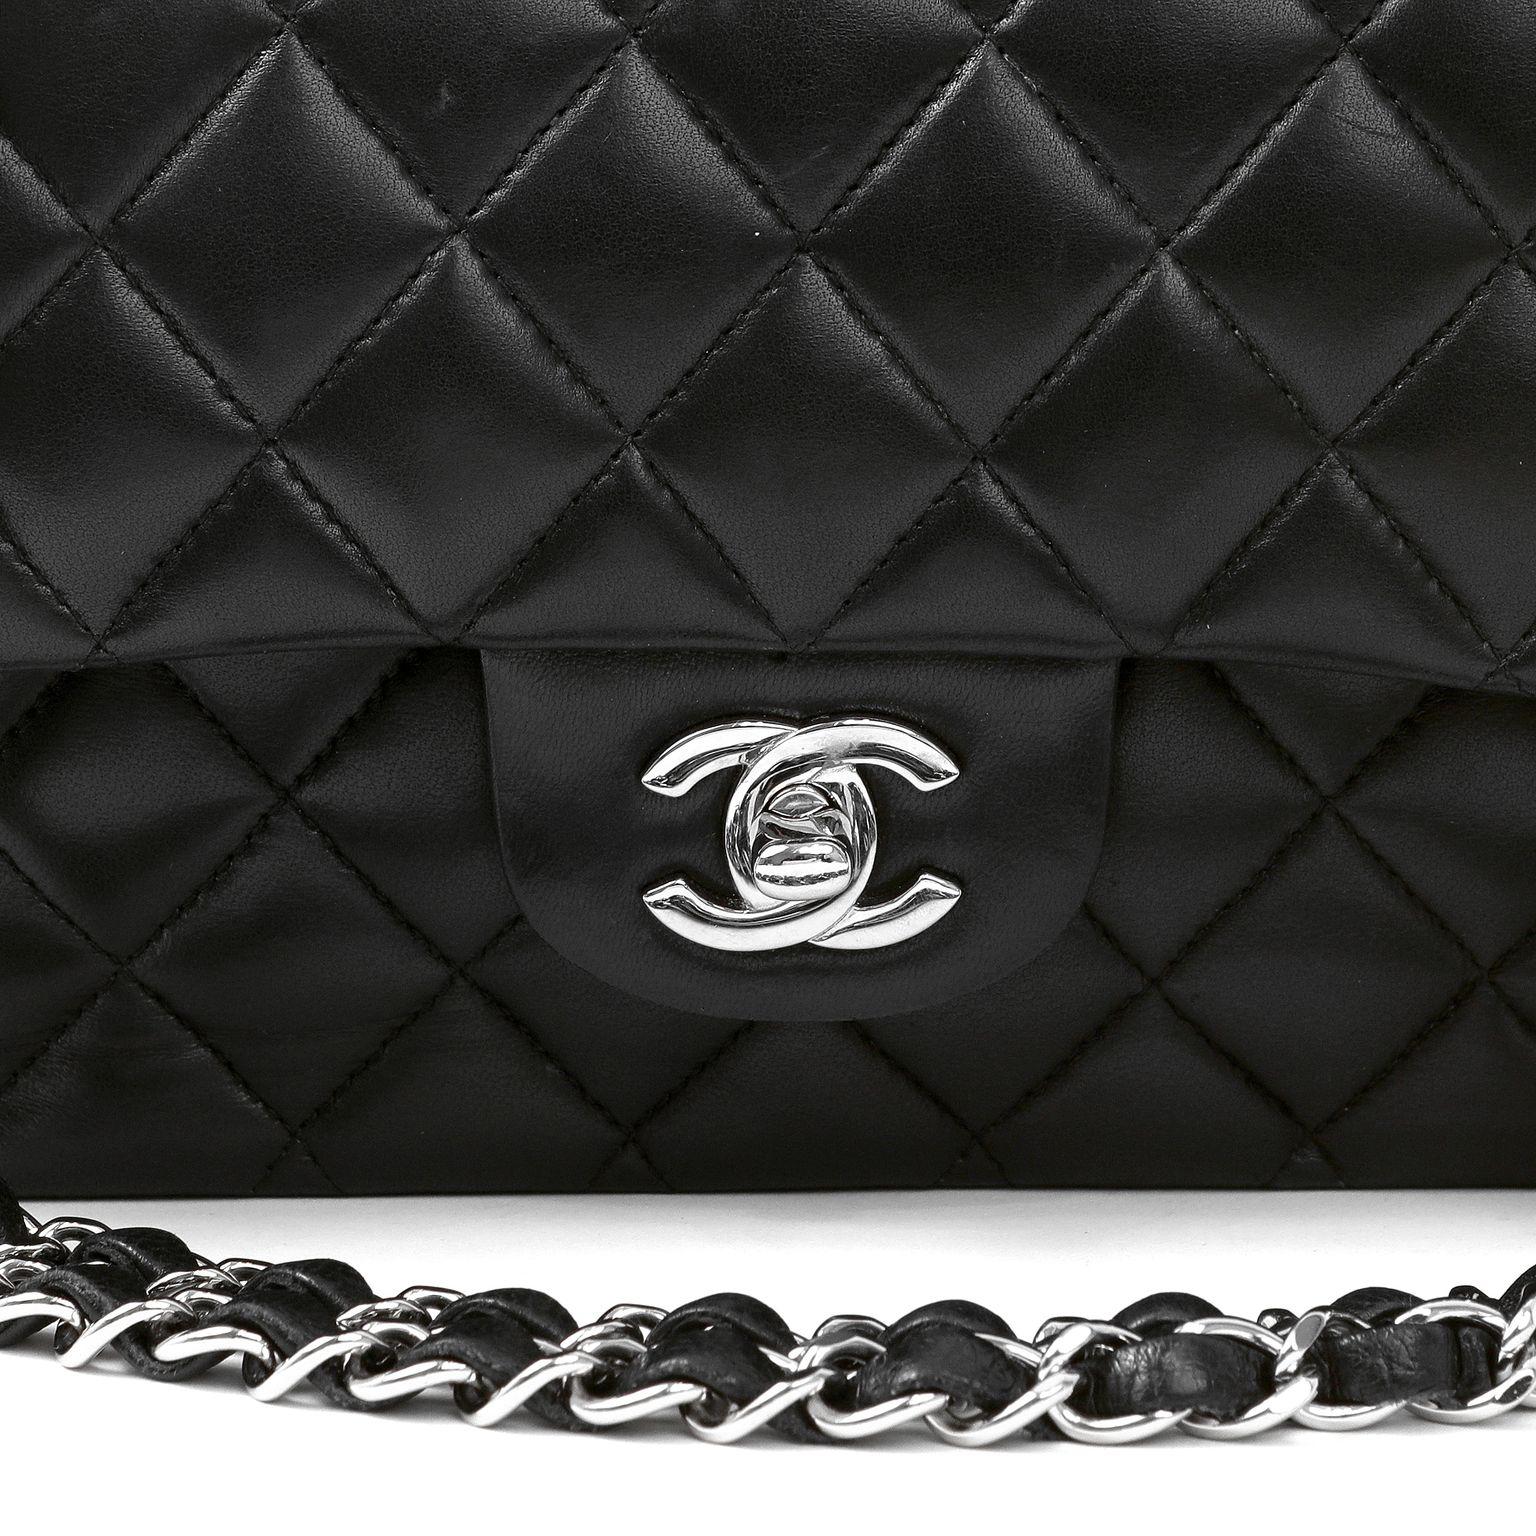 This authentic Chanel Black Lambskin Medium Classic Flap Bag is in pristine condition.  A key piece in any sophisticated wardrobe, the Classic Flap is one of the most sought-after Chanel styles produced.

Smooth lambskin is quilted in signature